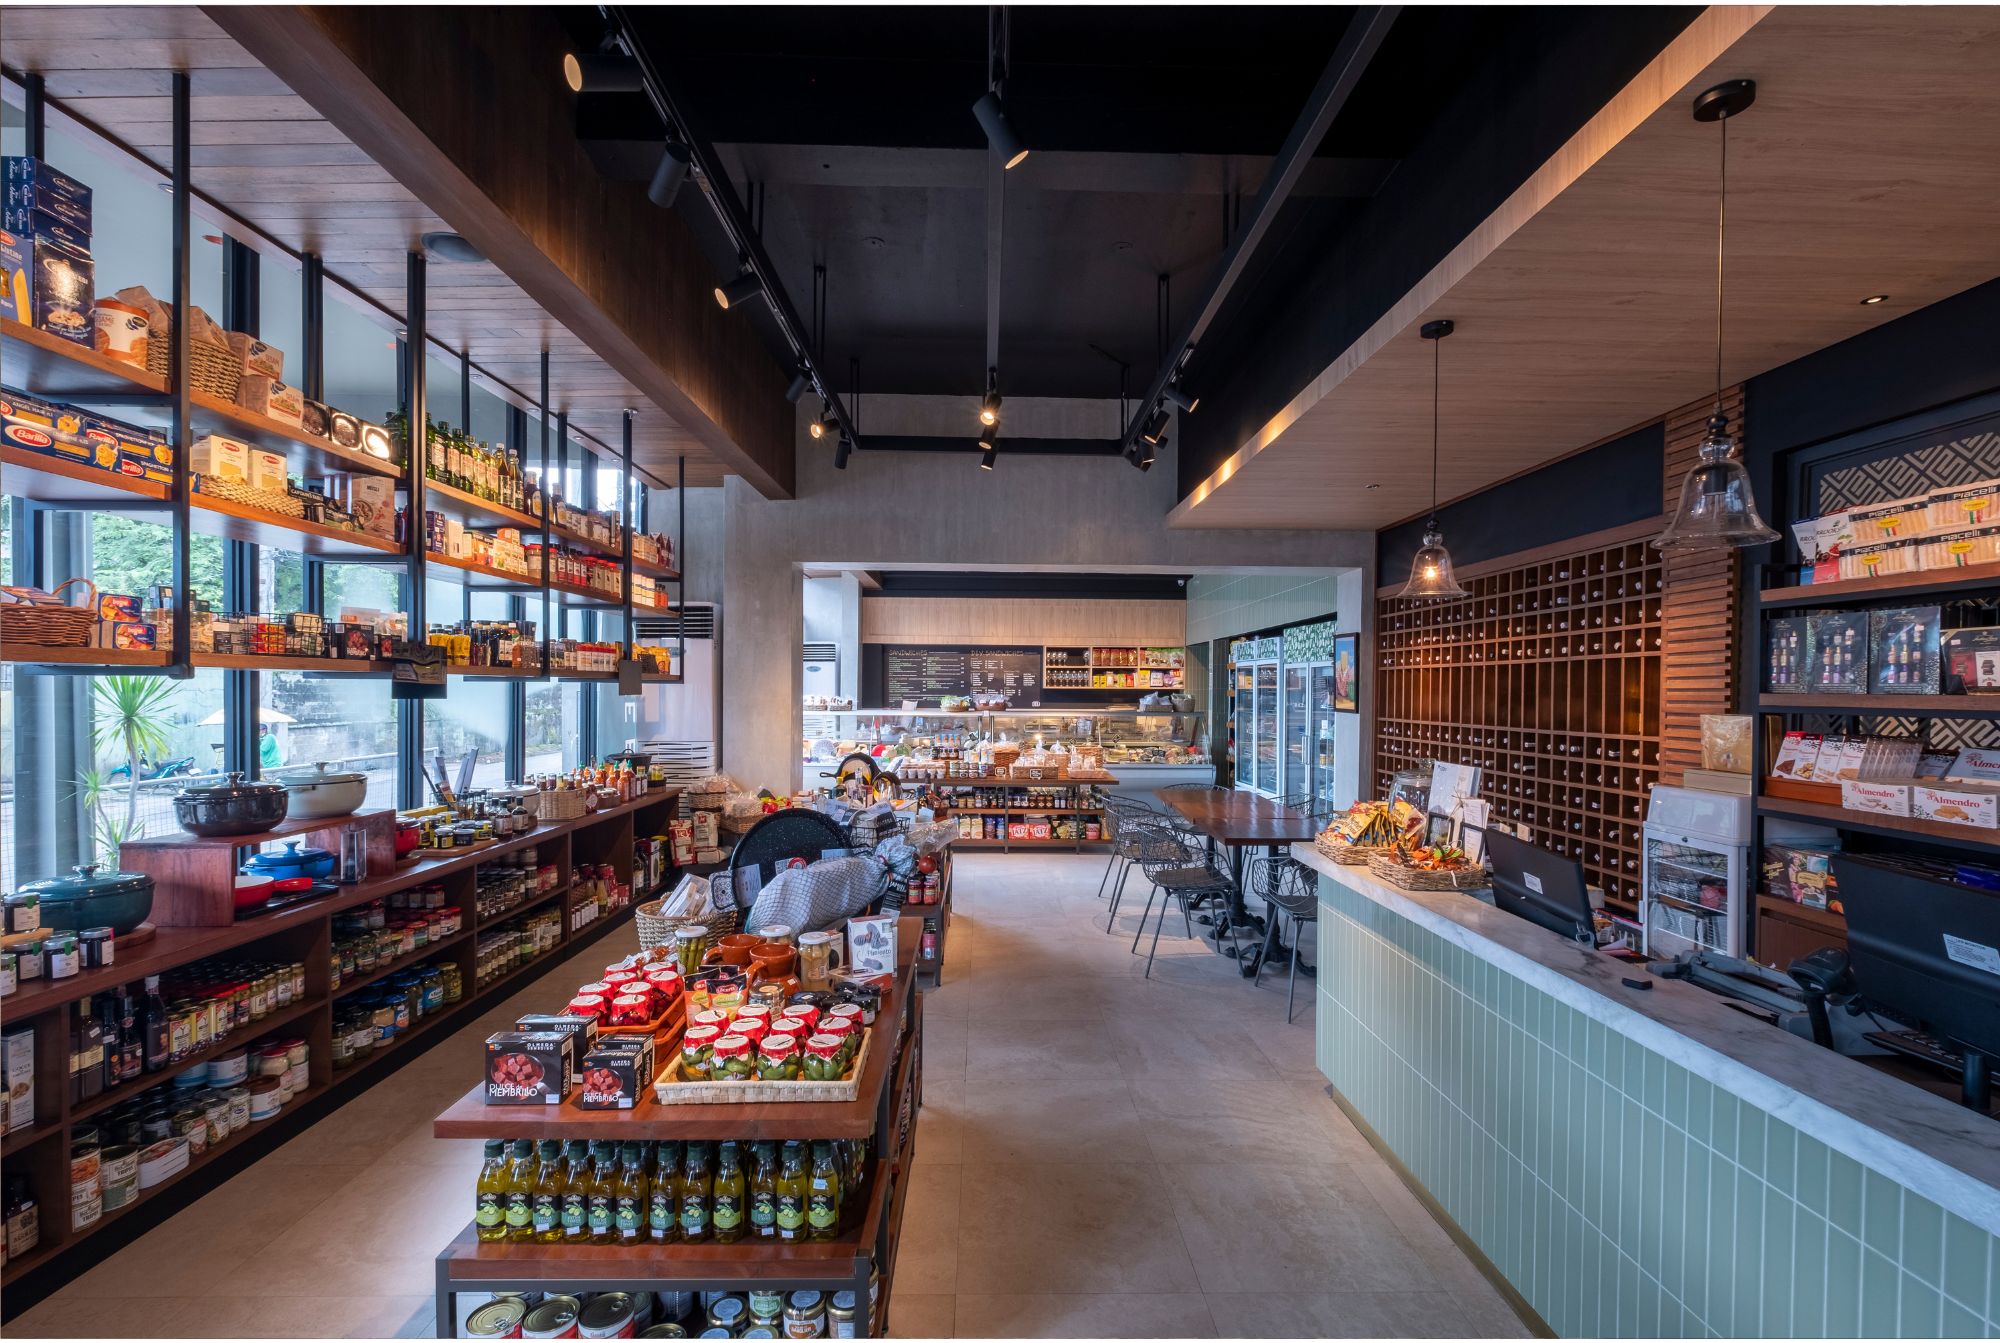 Cafe Bobs Deli designed by Larawan Ink in Bacolod, with shelves packed with goods.